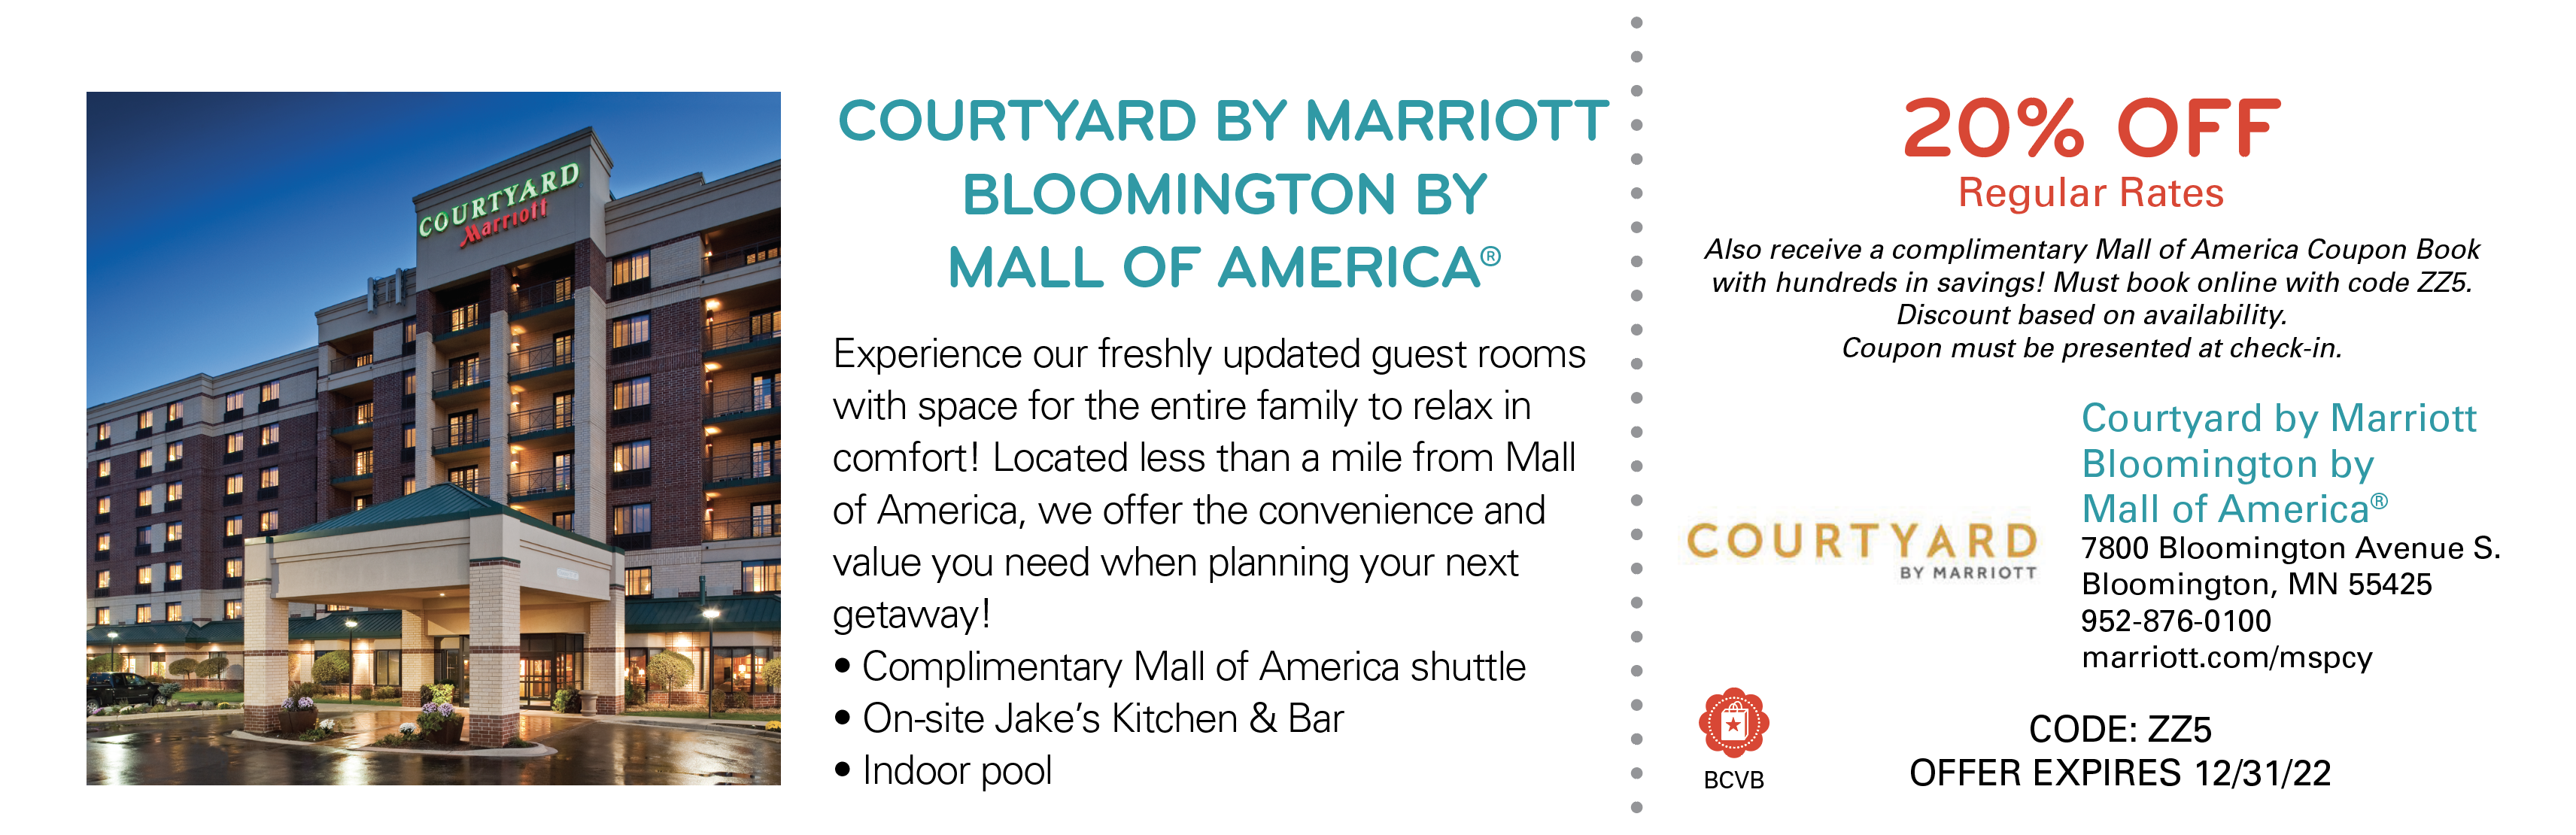 Courtyard by Marriott Coupon